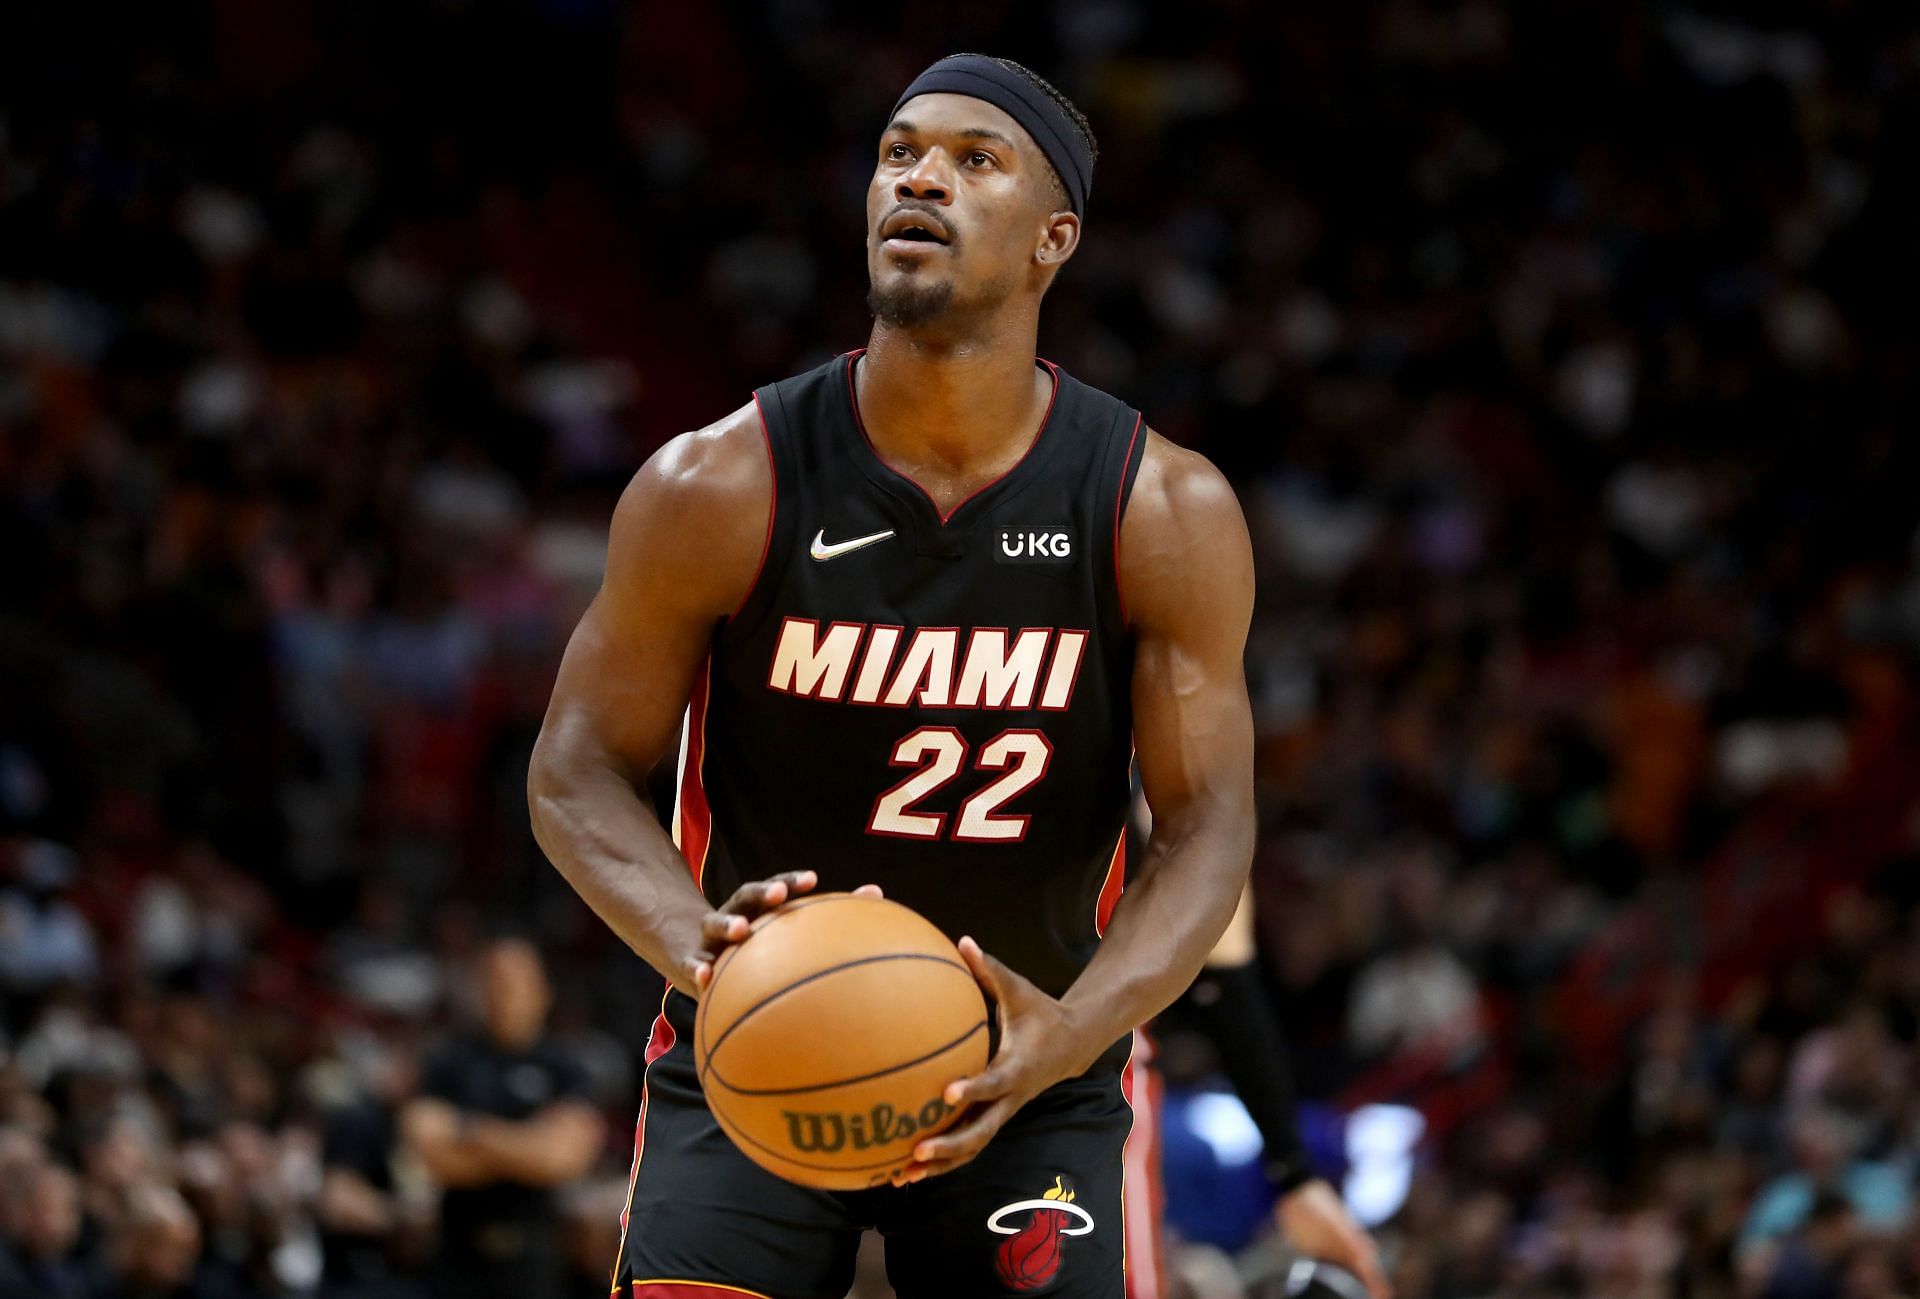 Jimmy Butler #22 of the Miami Heat shoots a free throw during a game against the San Antonio Spurs at FTX Arena on February 26, 2022 in Miami, Florida.